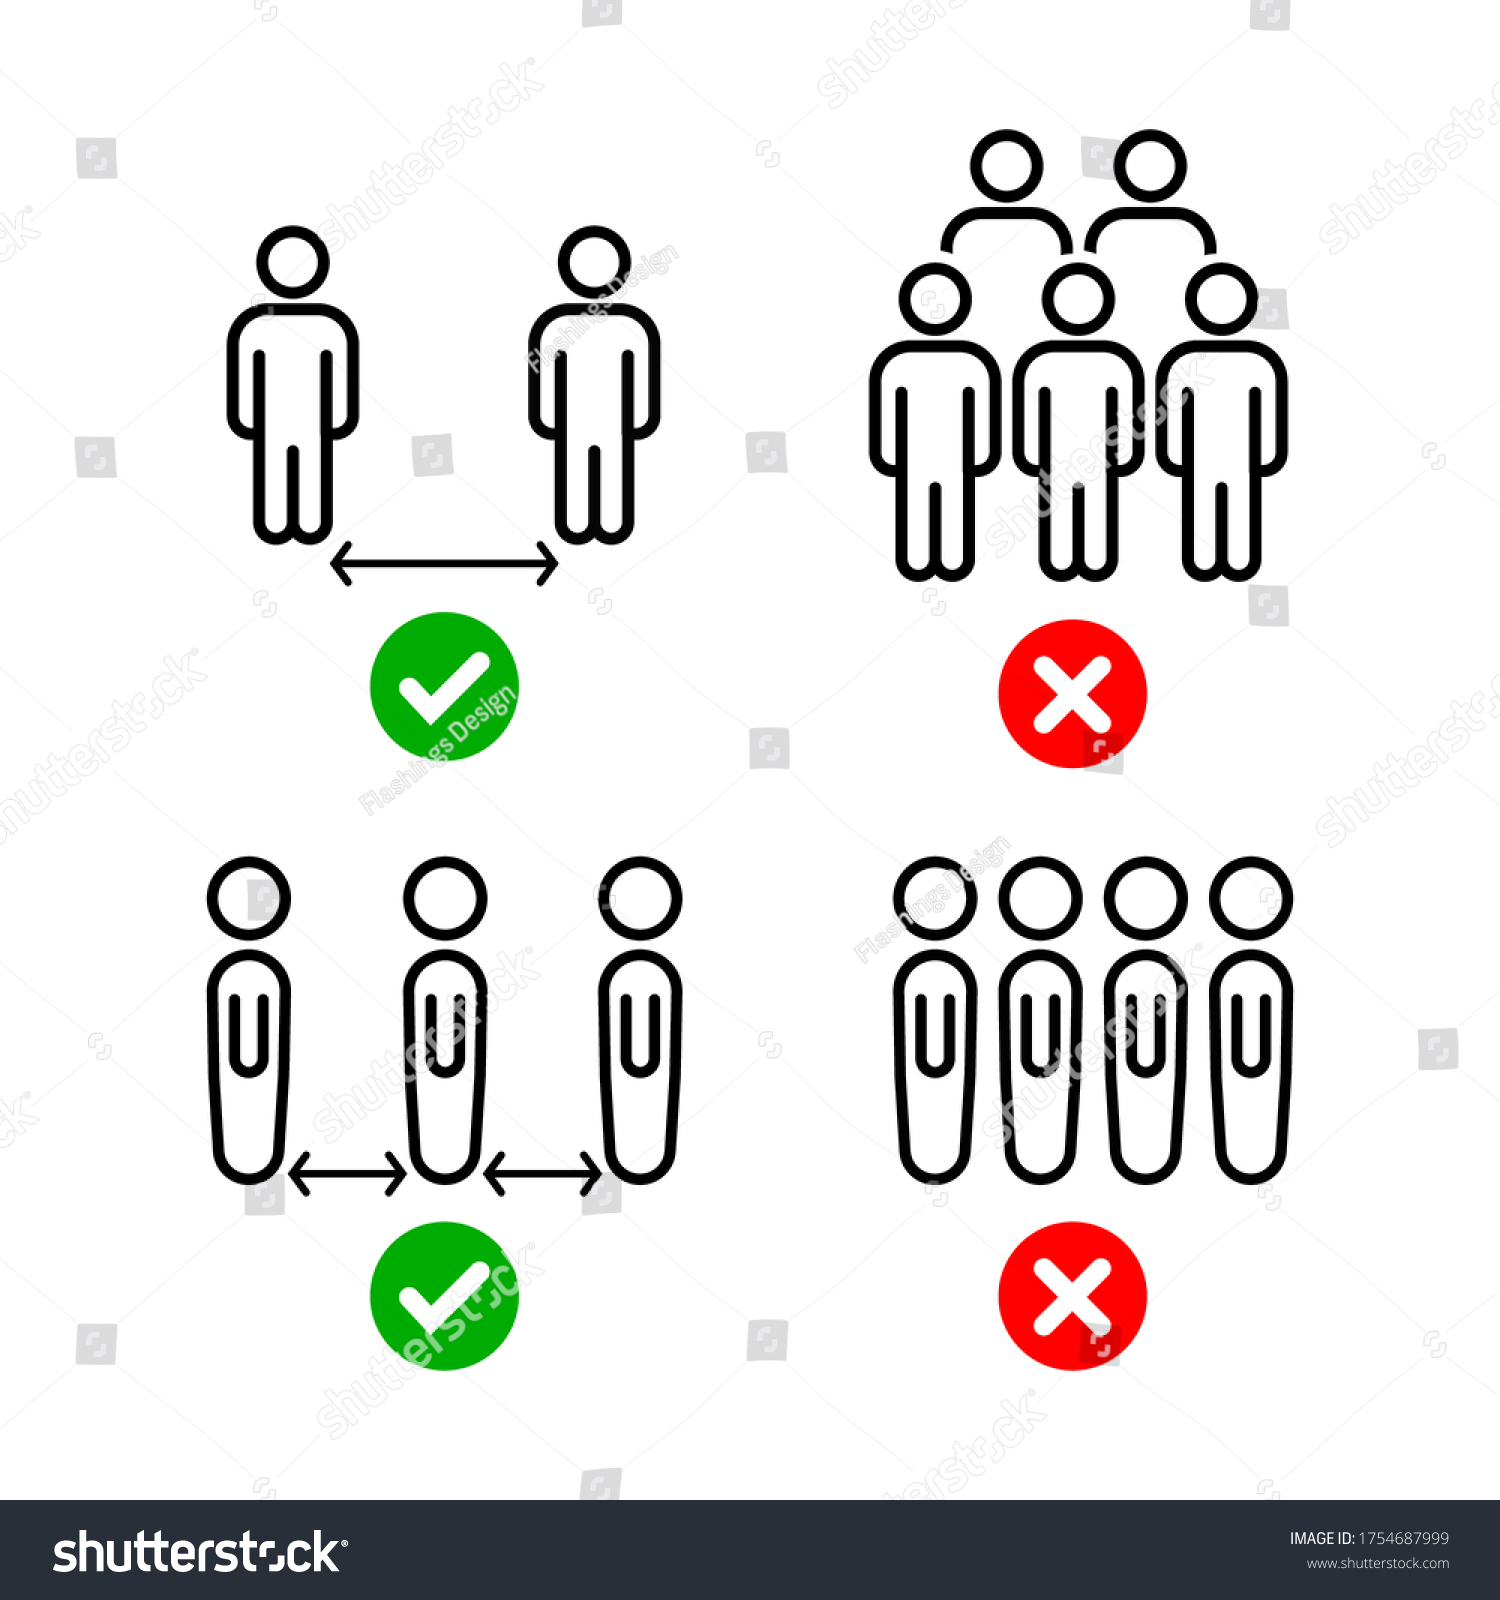 Keep safe distance infographic, 4 Set icon design vector. Social Distancing Keep Your Distance 1 m or 1 Metre Infographic Icon. Vector Image. #1754687999